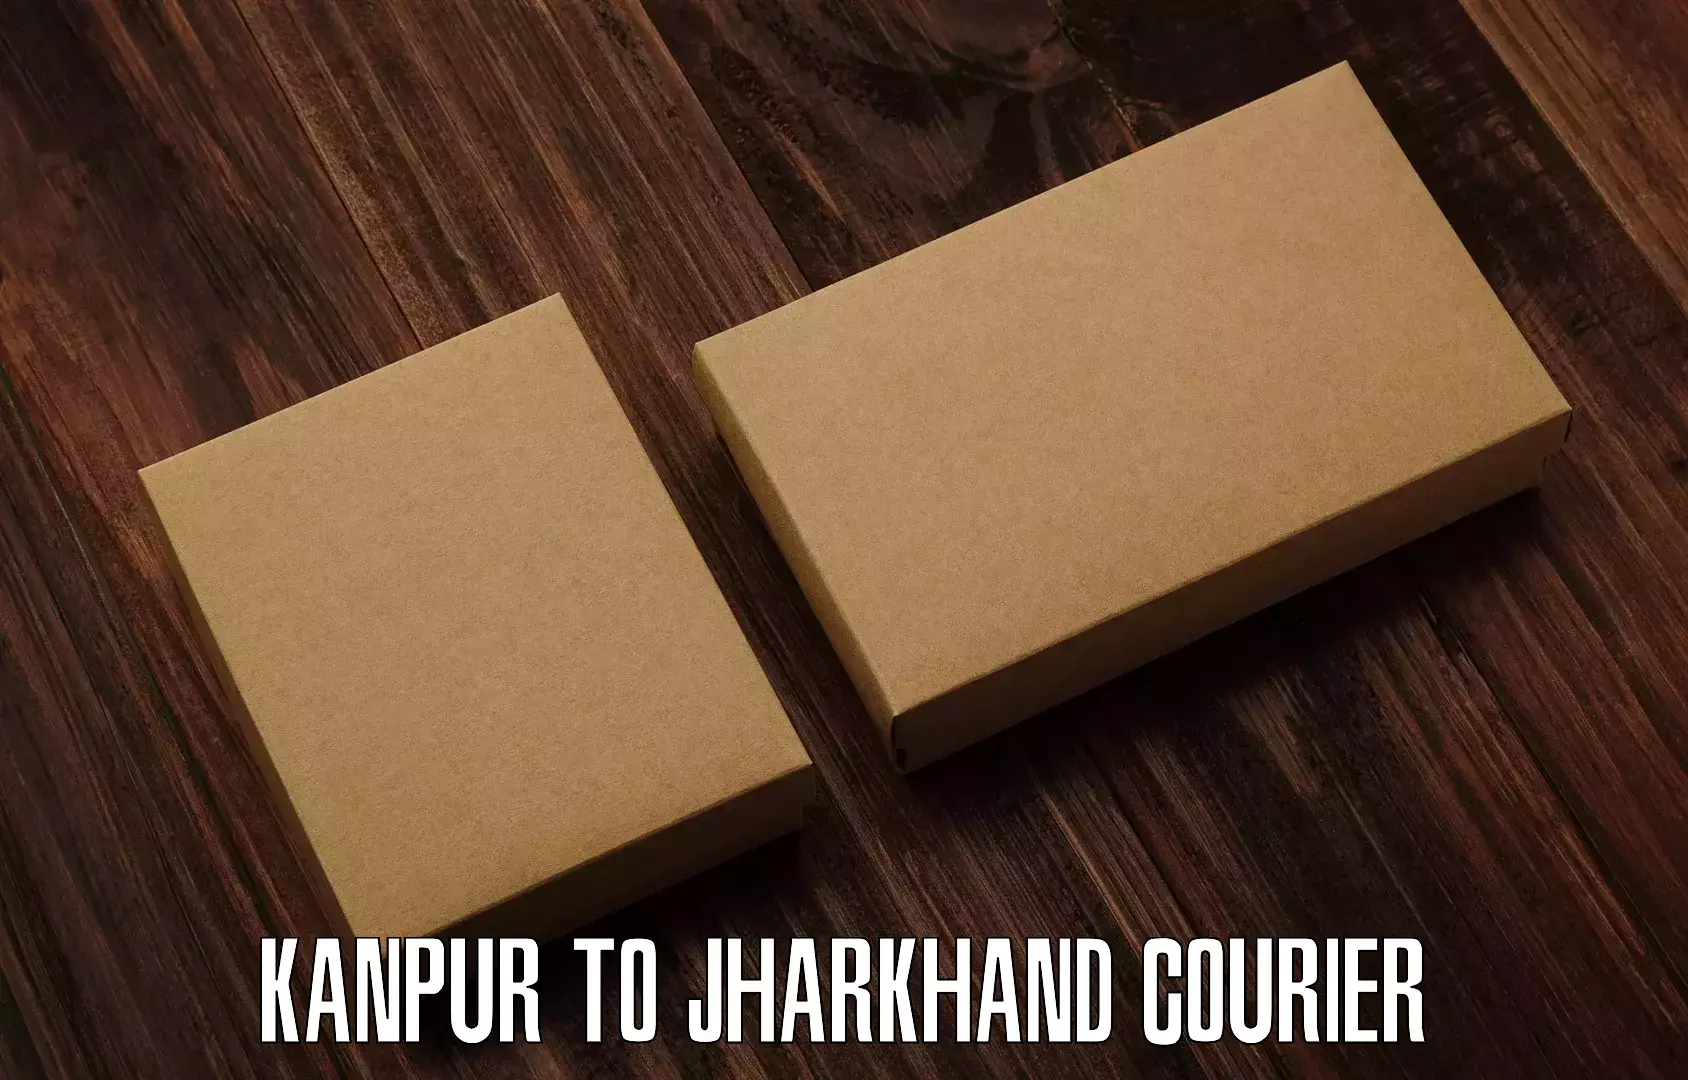 Full-service courier options Kanpur to IIT Dhanbad